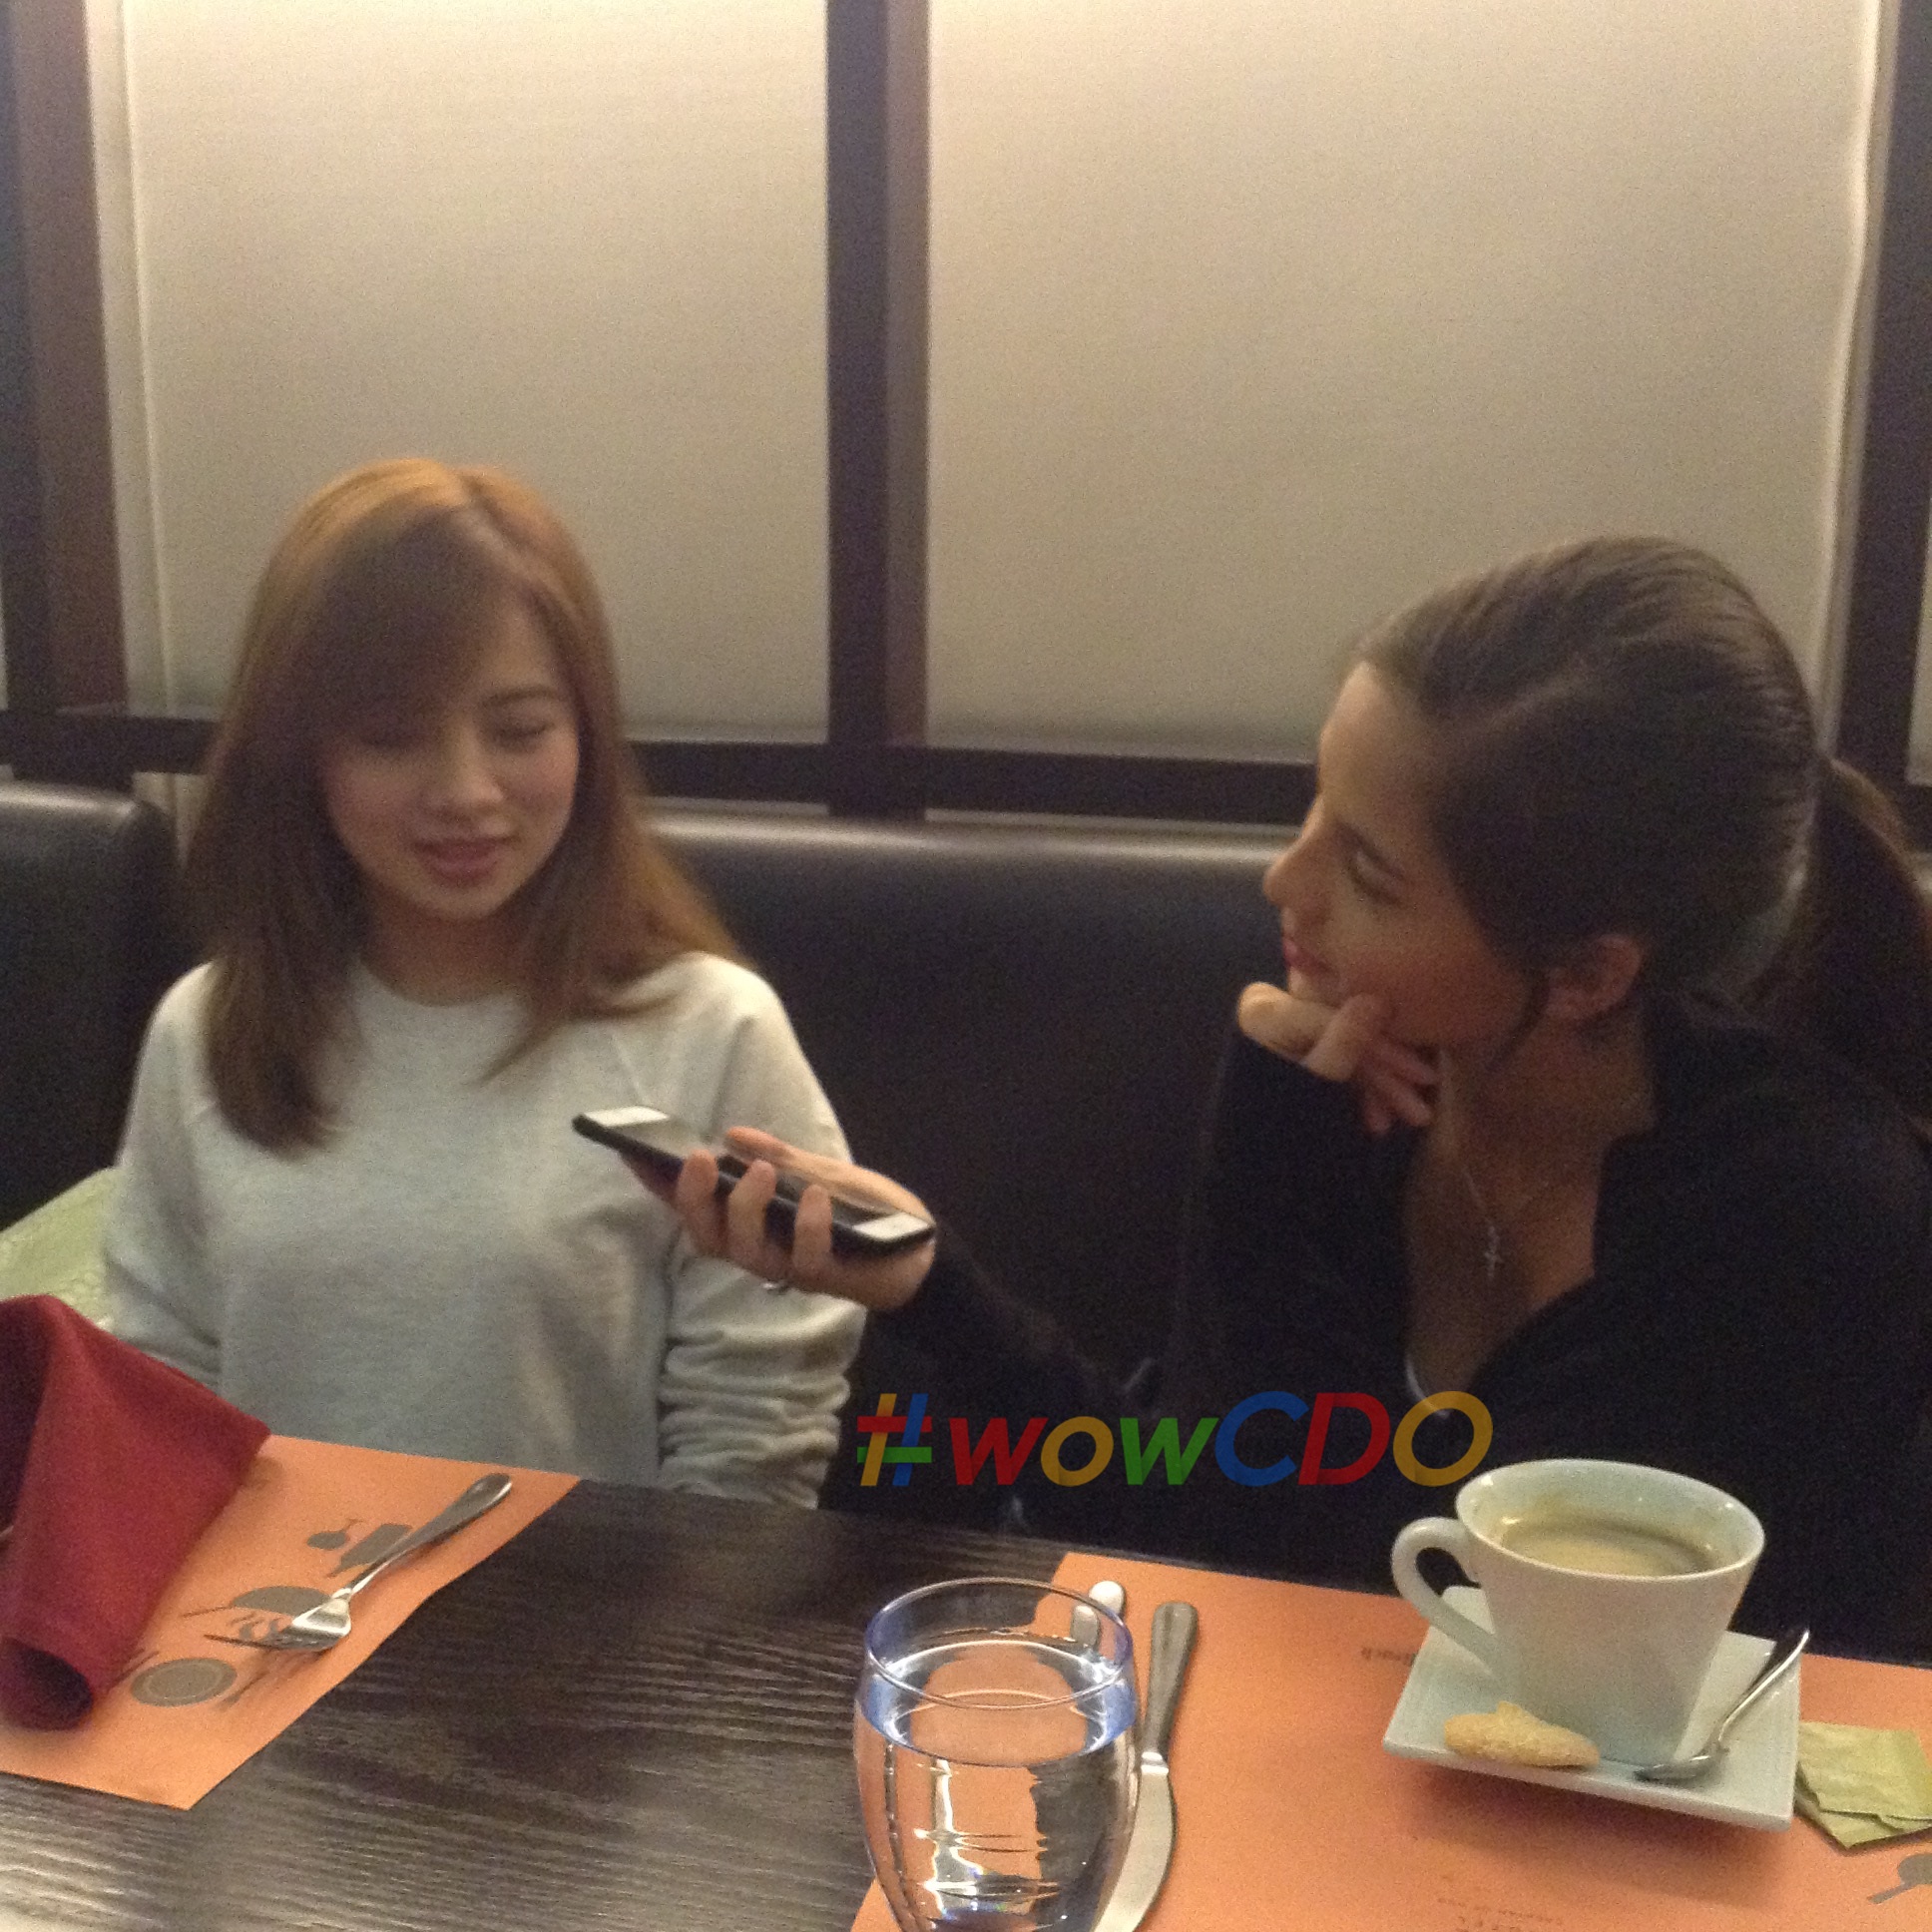 Jasmine acts as an interviewer when Ella Cruz arrived at the quick chit-chat.